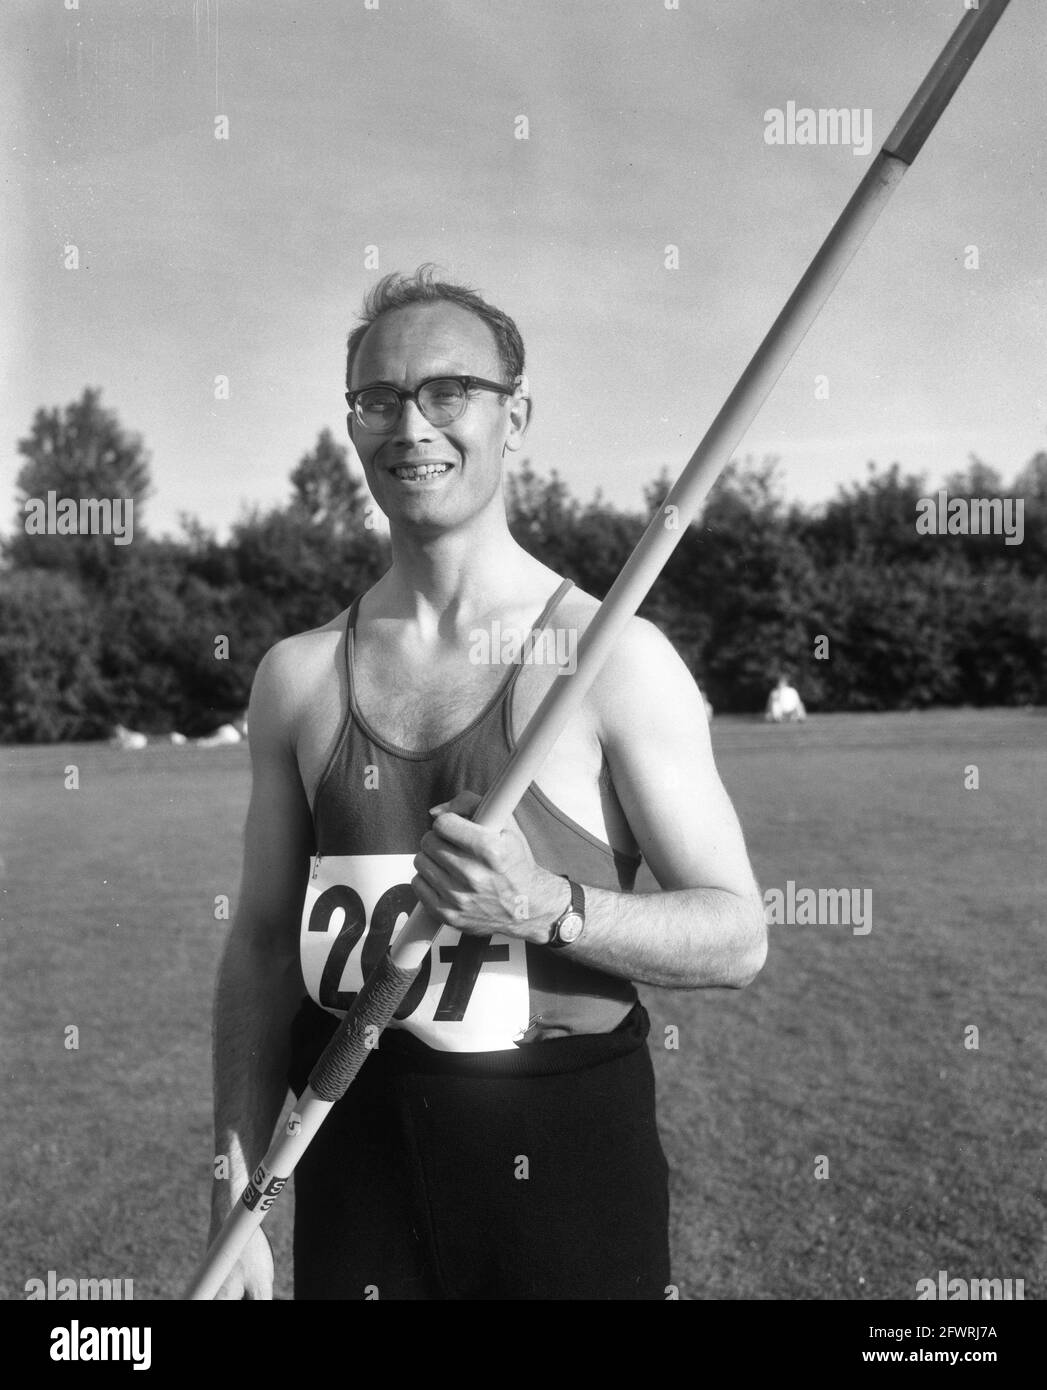 Dutch athletics championships in Groningen, P. Olofsen champion javelin thrower, August 14, 1965, athletics, champion, championships, The Netherlands, 20th century press agency photo, news to remember, documentary, historic photography 1945-1990, visual stories, human history of the Twentieth Century, capturing moments in time Stock Photo